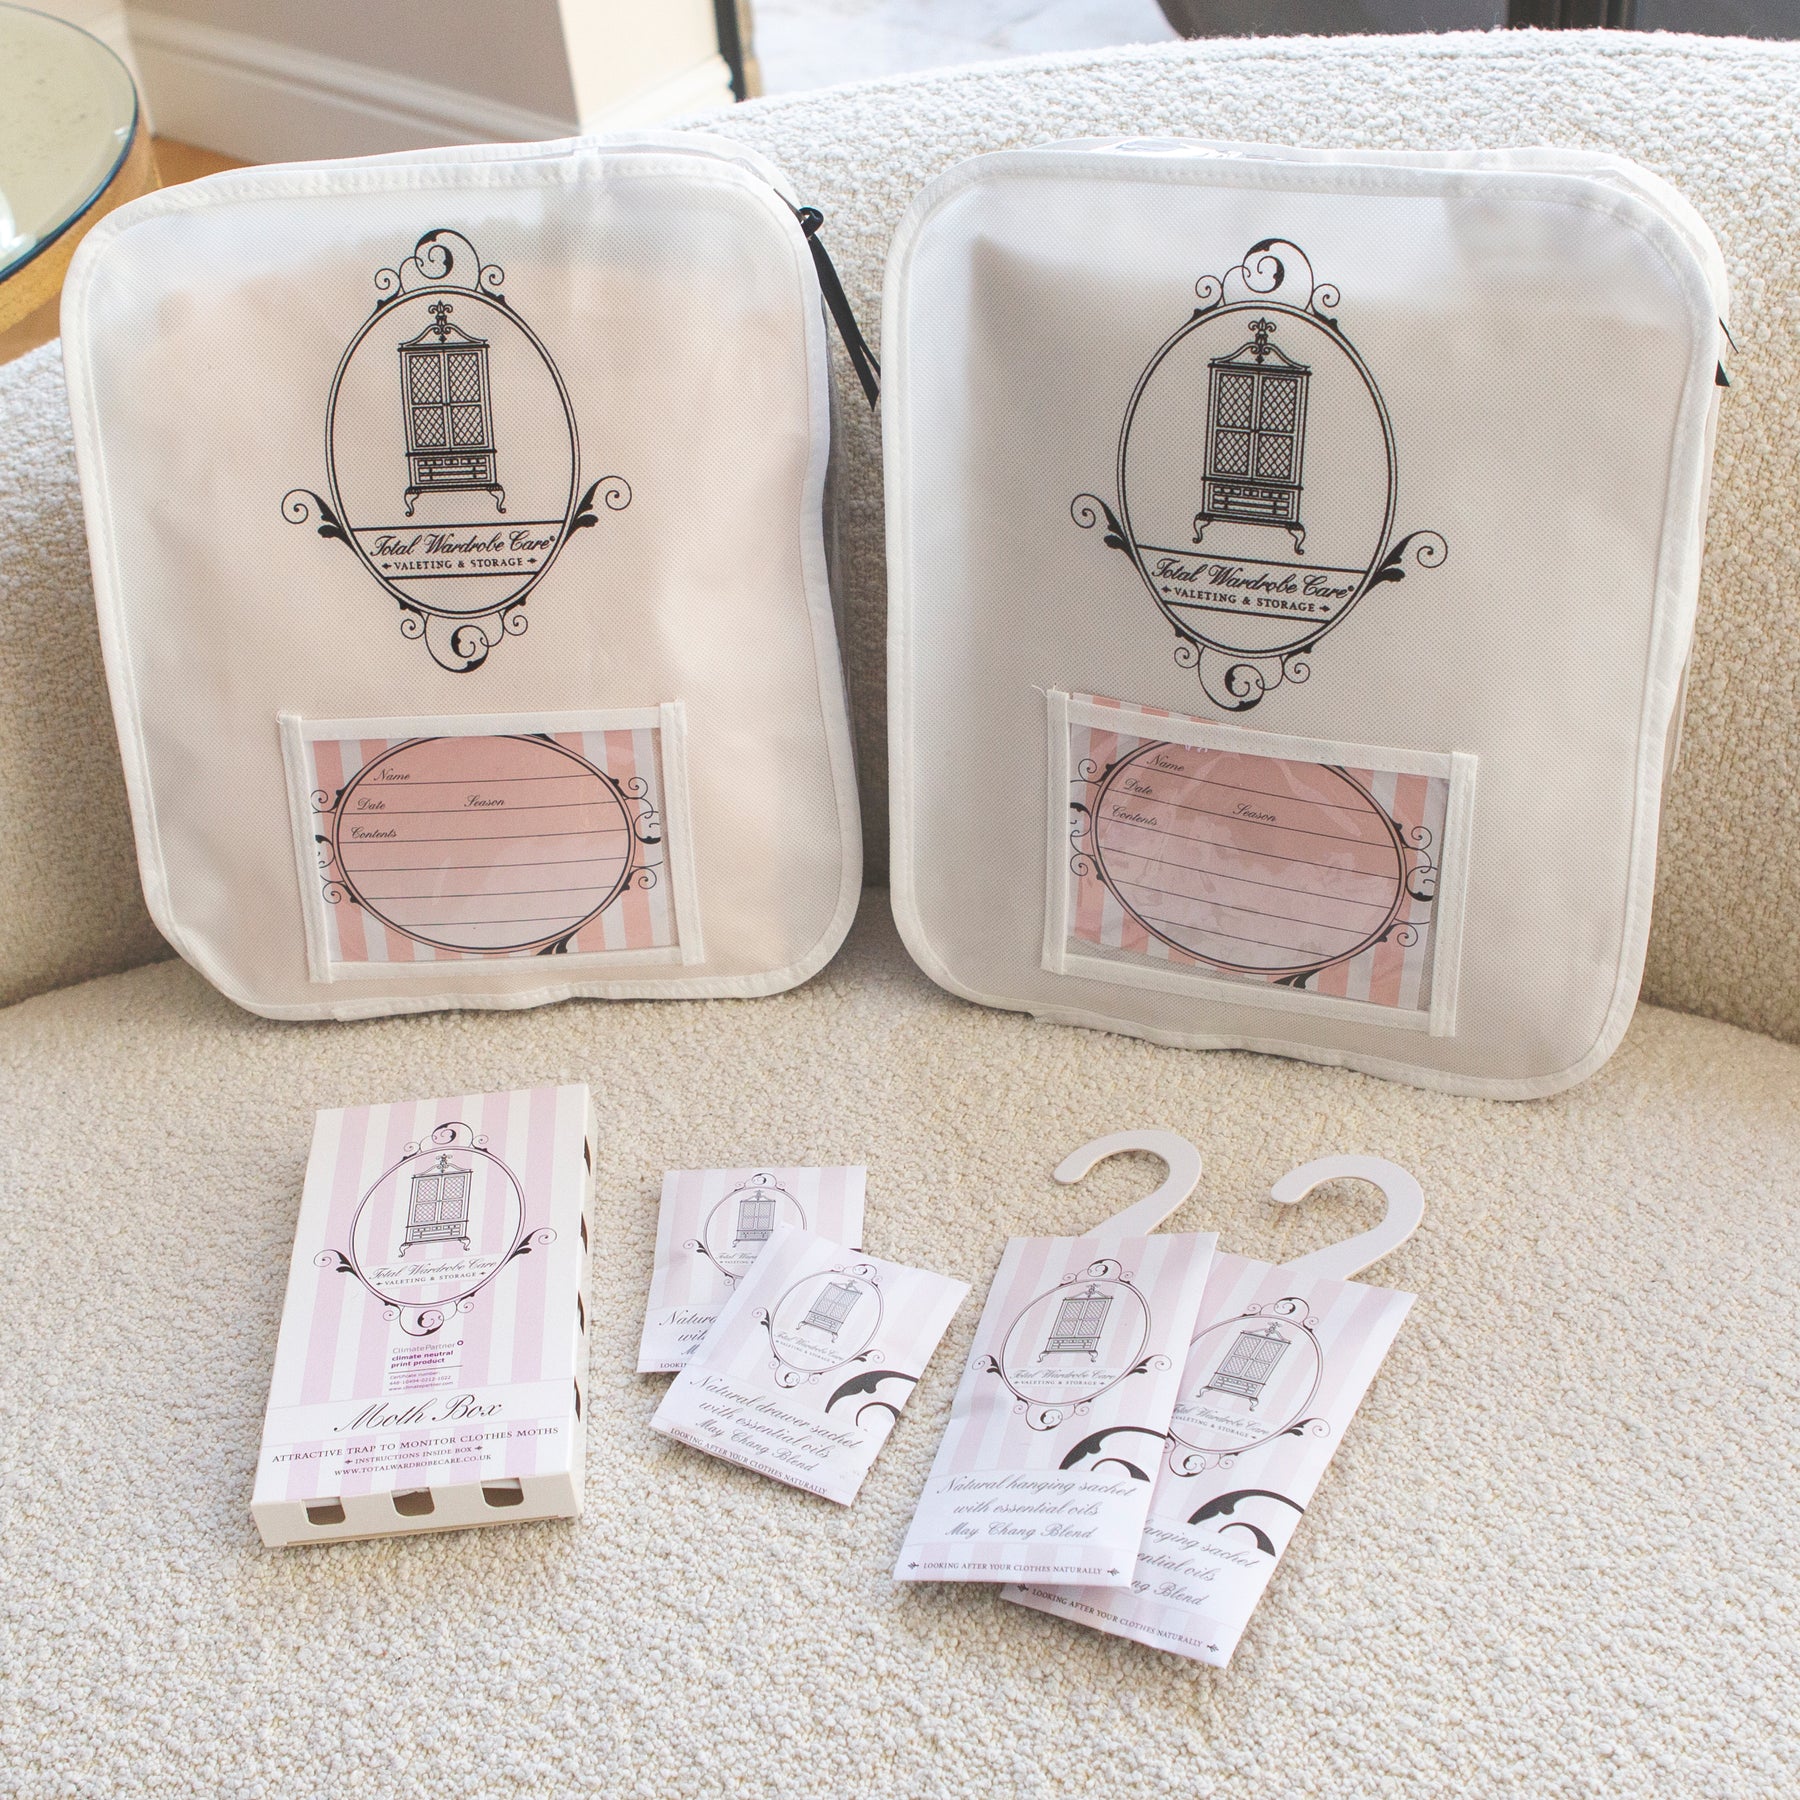 Total Wardrobe Care moth box, hanging and drawer sachets beside knitwear storage bags on fabric surface